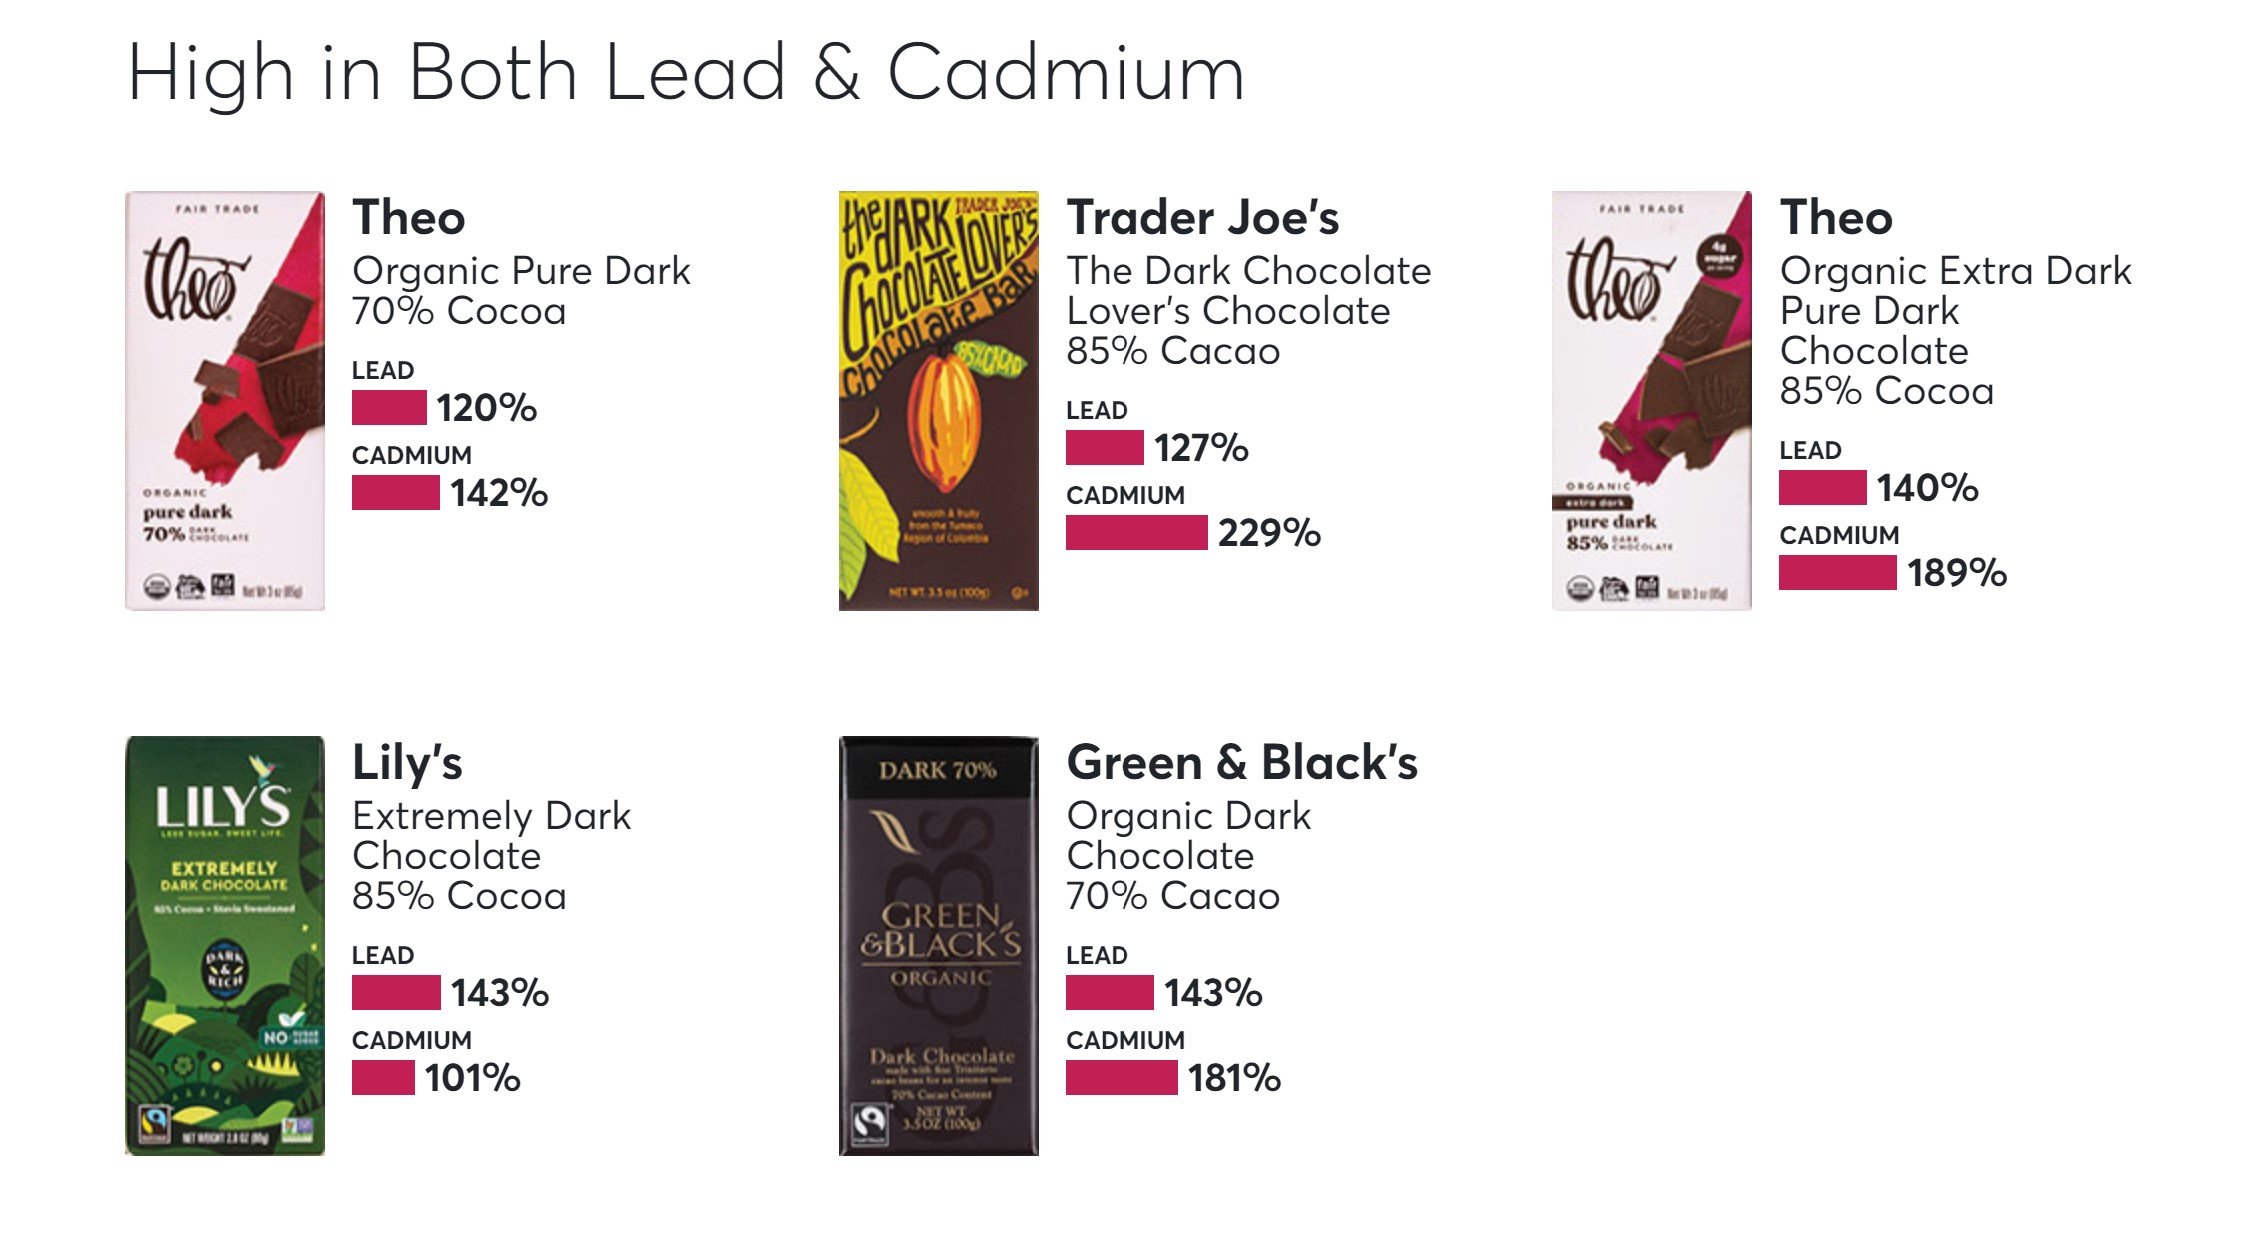 23 Chocolate Bars Contained by Unsafe Levels of Cadmium and Lead - Consumer Safety Study